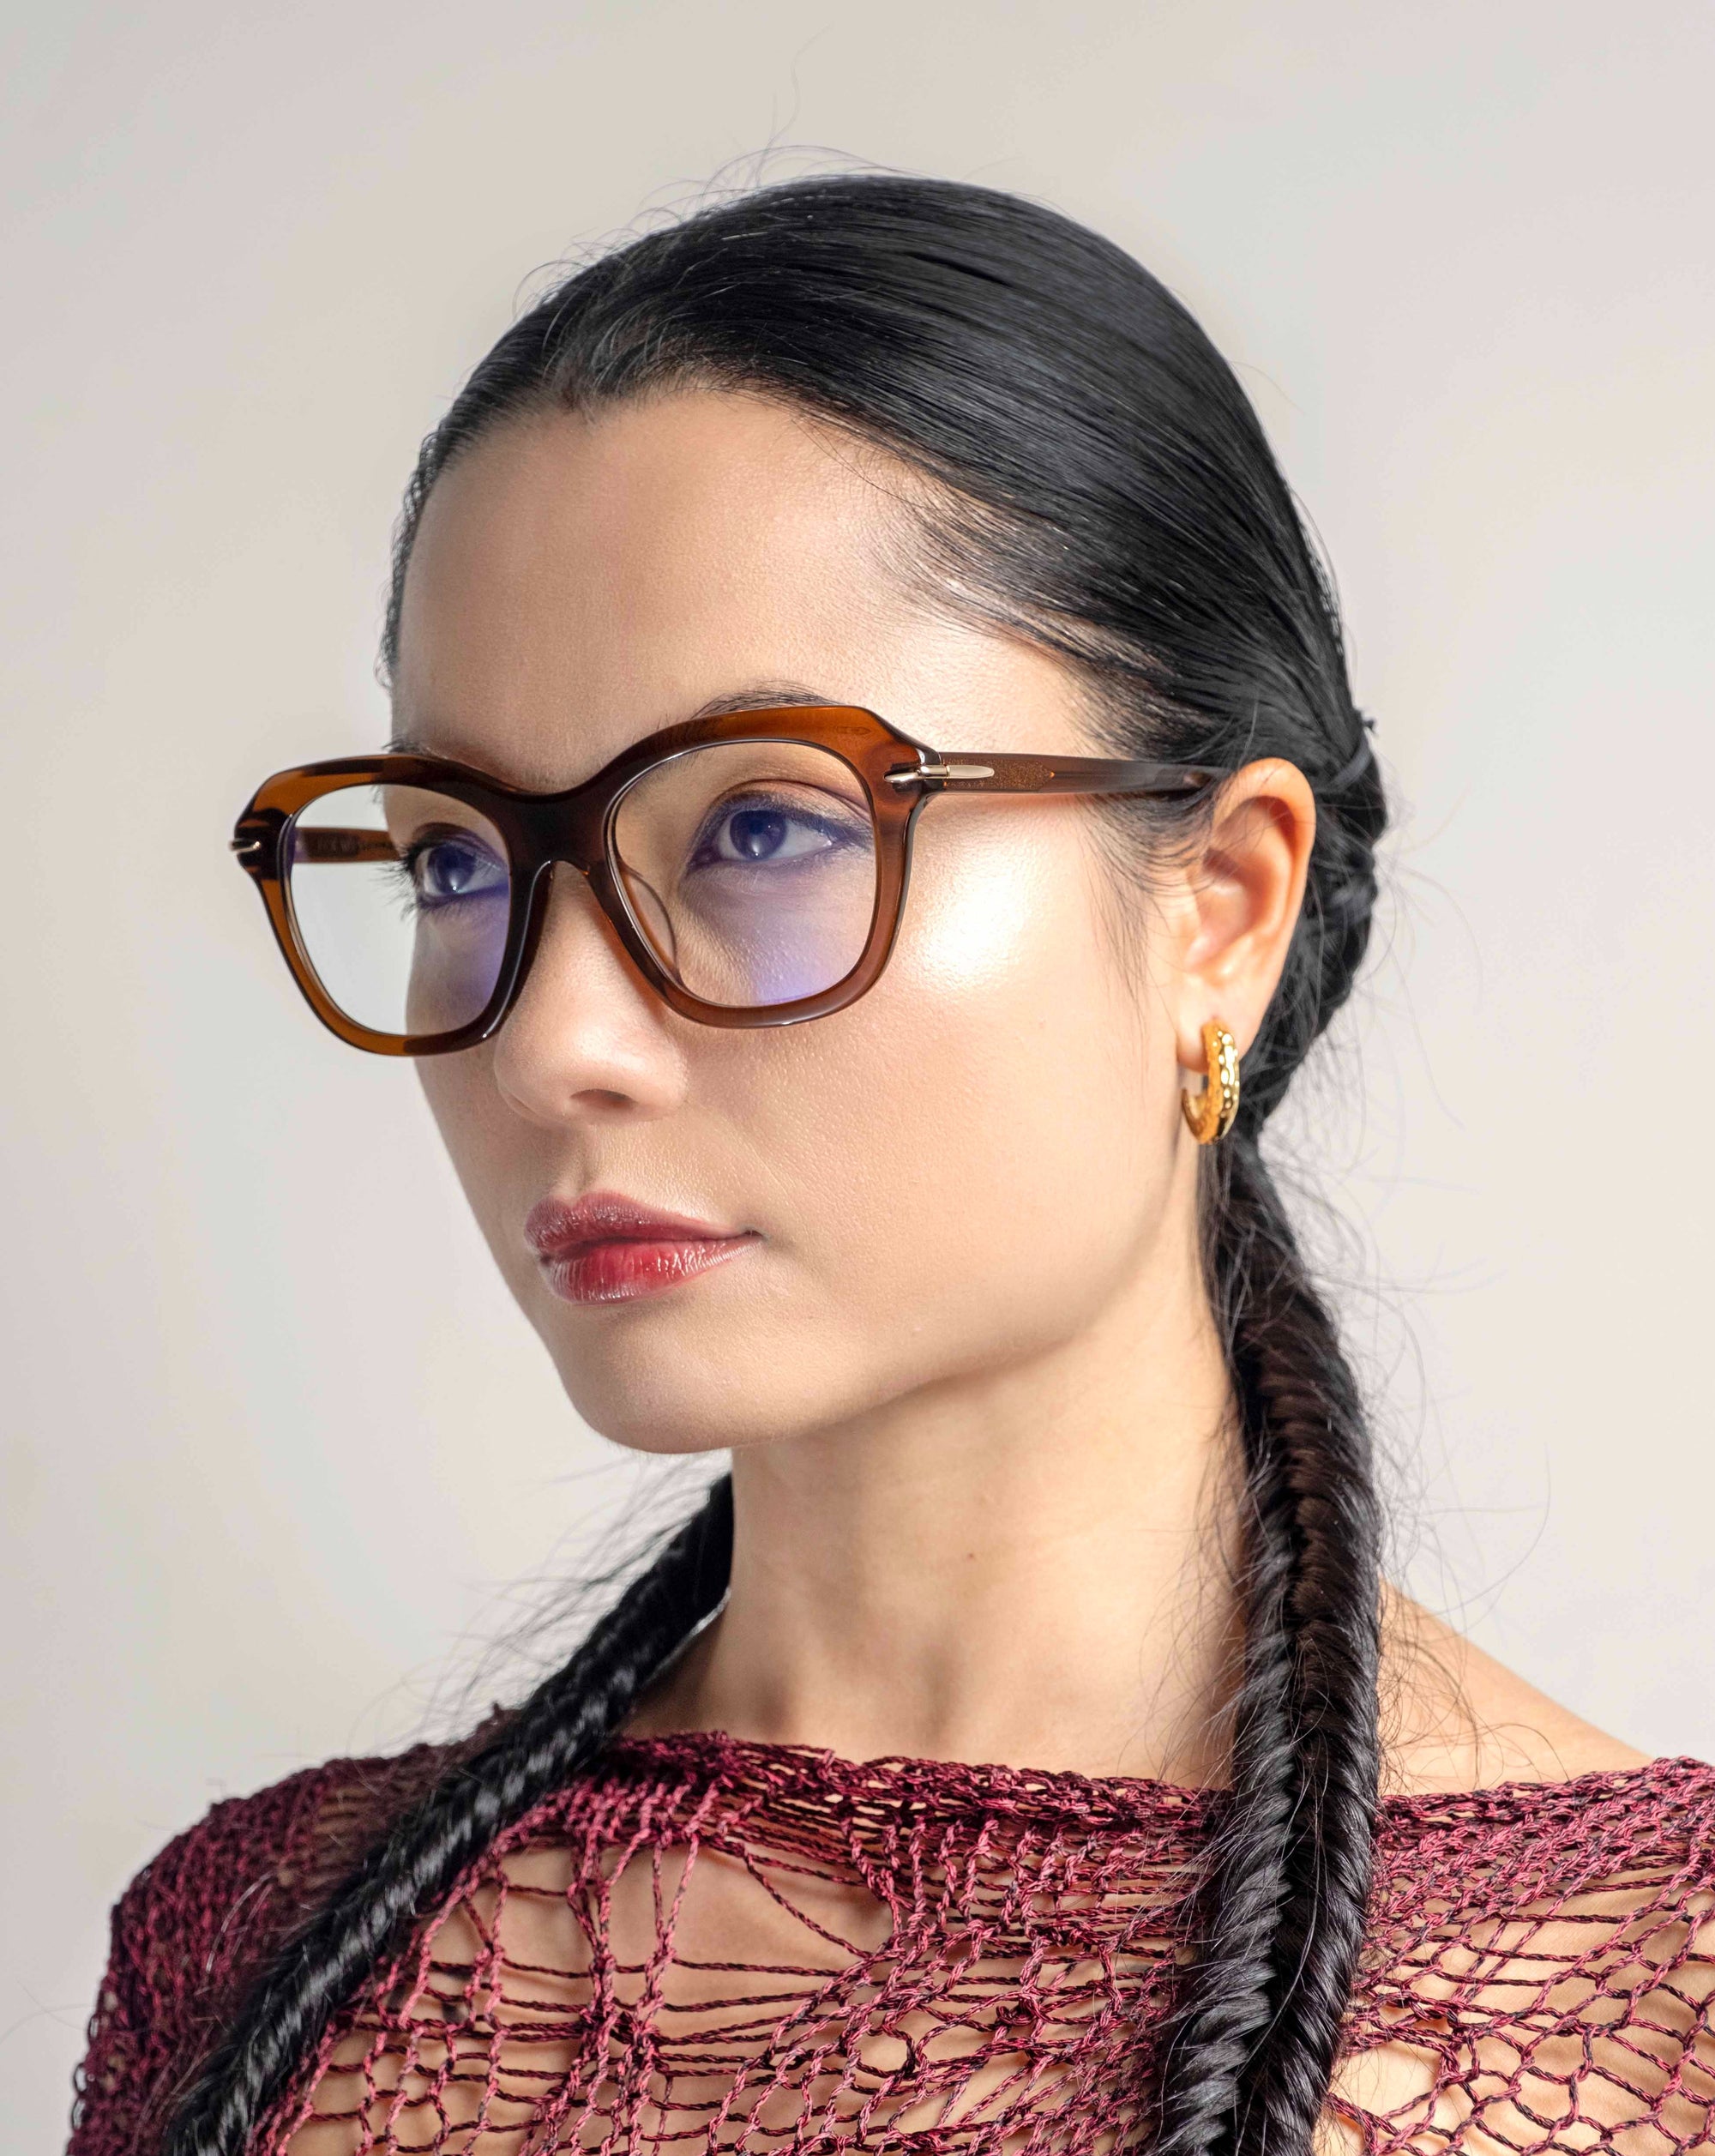 A woman with long, dark hair styled in two braids wears large, brown-framed Helene glasses with a cat-eye silhouette from For Art&#39;s Sake® and a gold hoop earring. She has a neutral expression and is dressed in a red, textured garment, with a light gray background behind her.